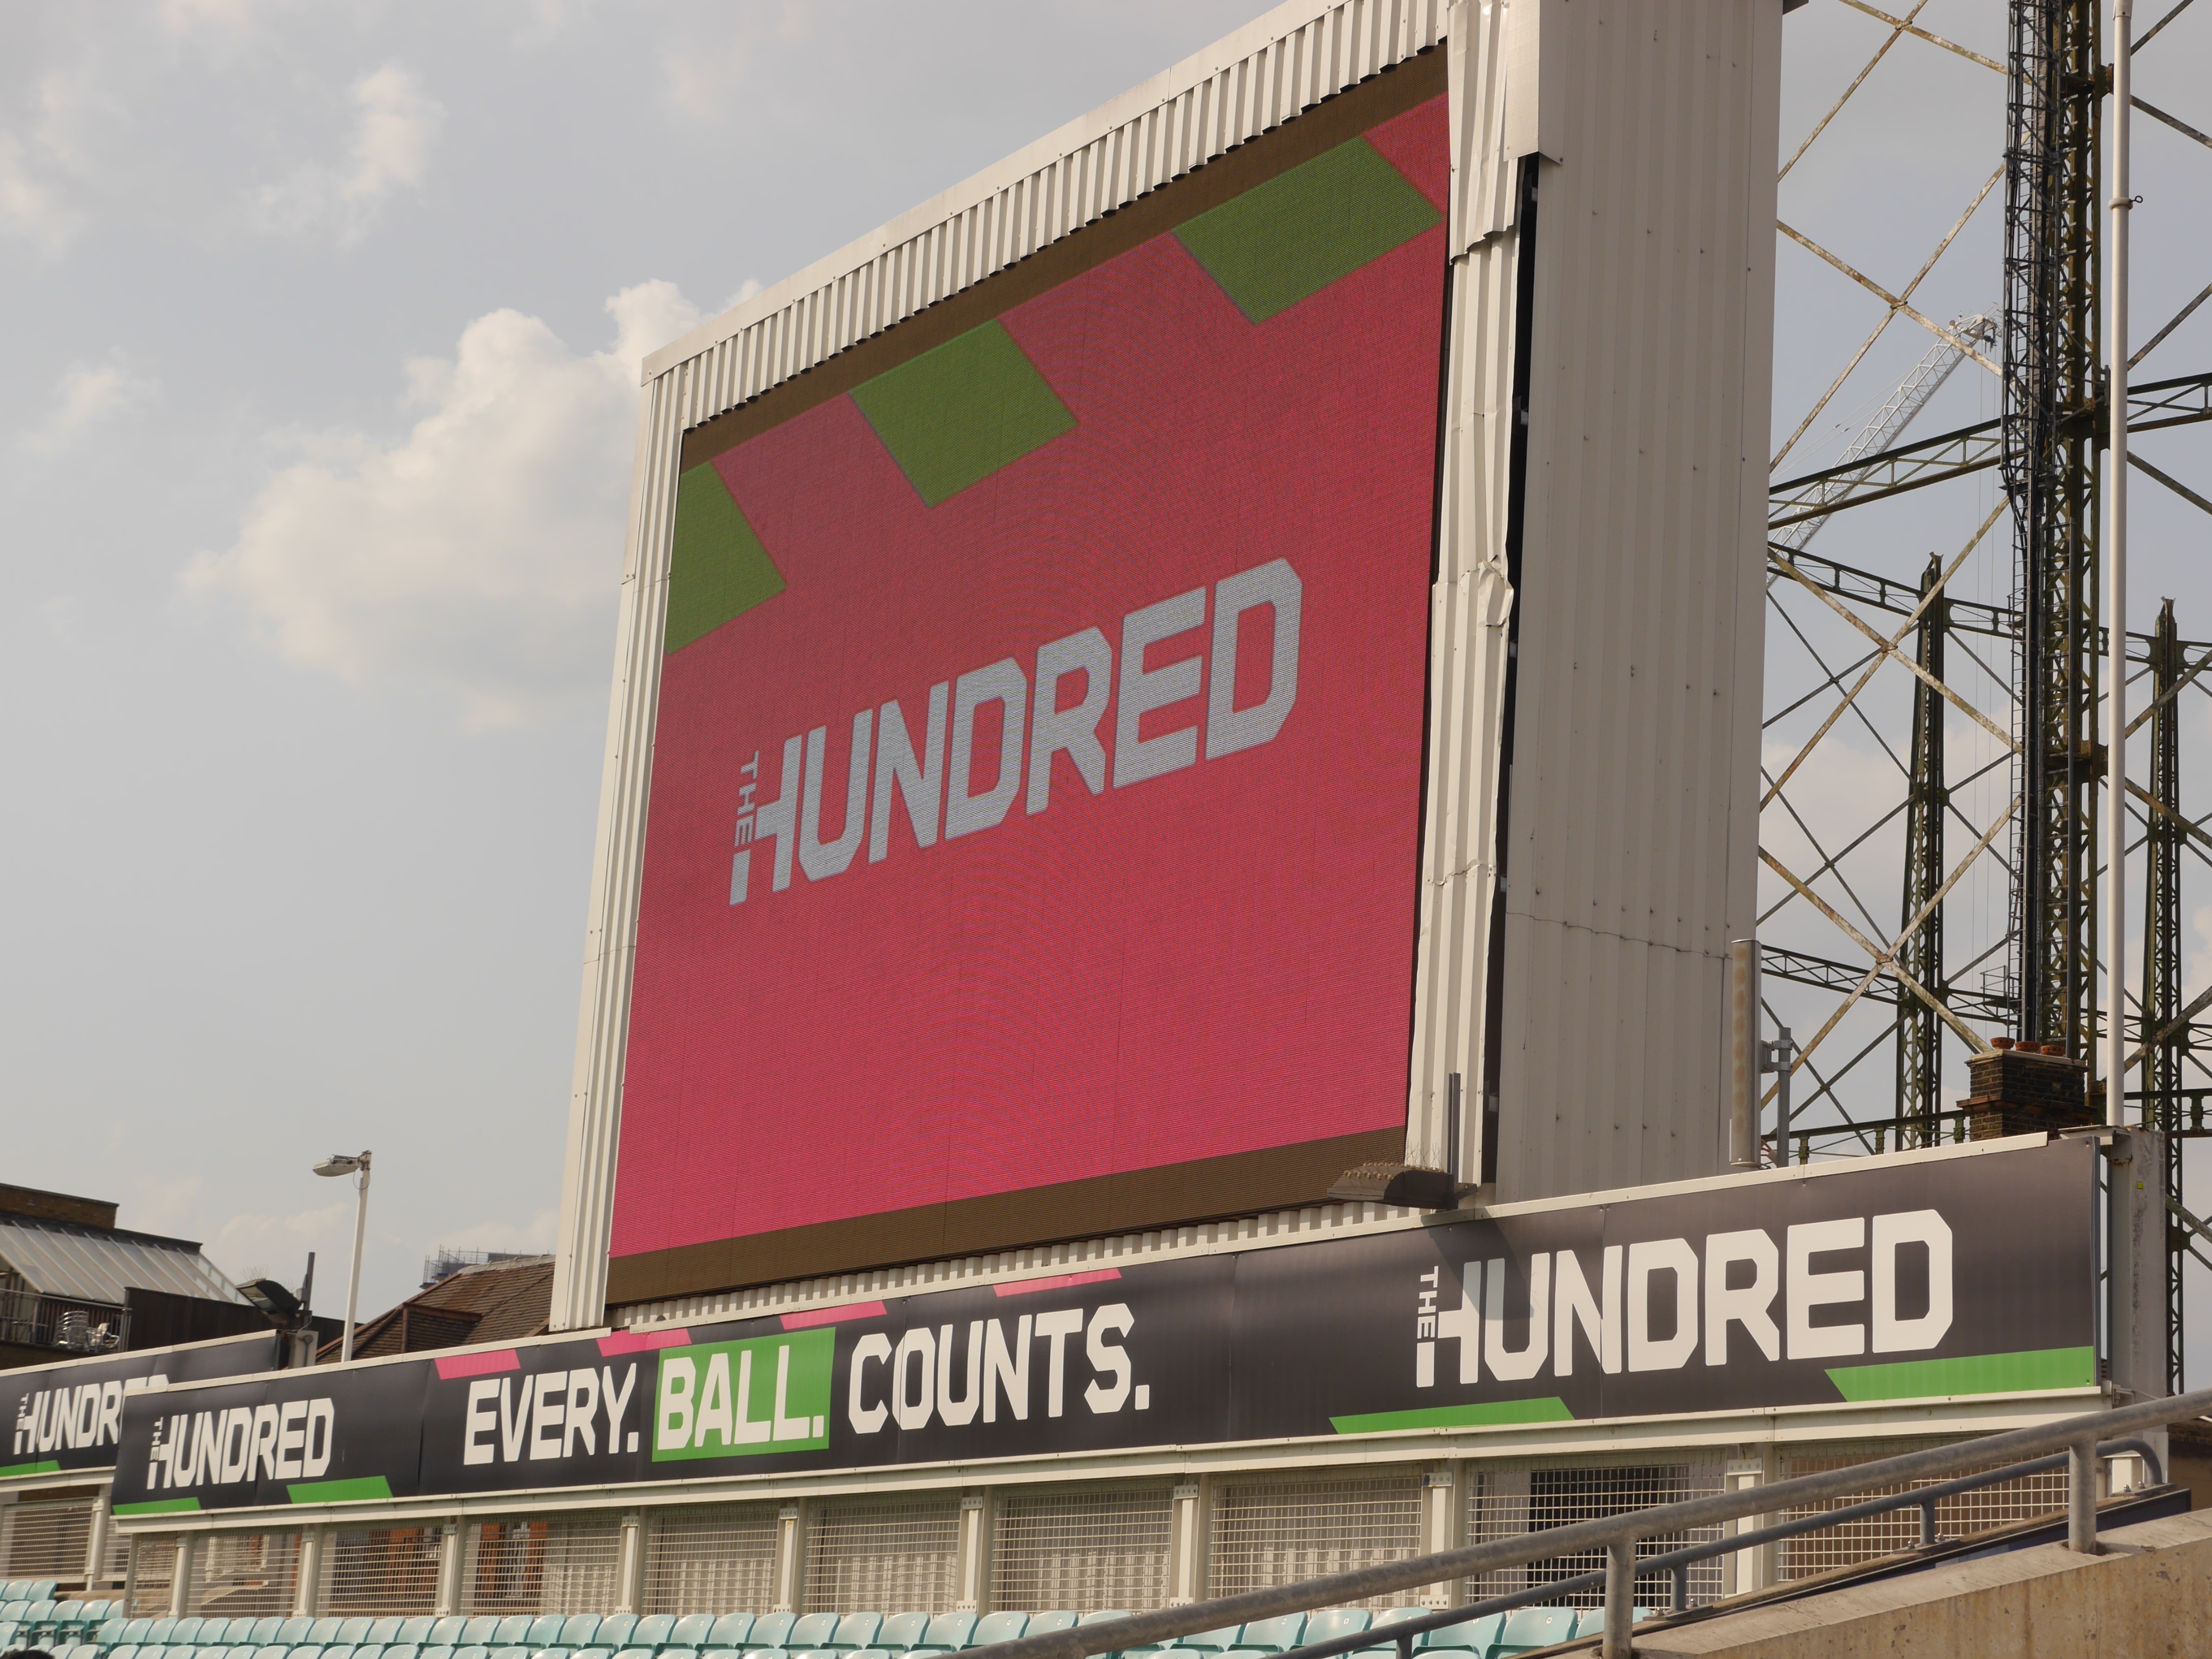 The Hundred | Game one: How it differed from T20, what was new, what worked and what didn’t